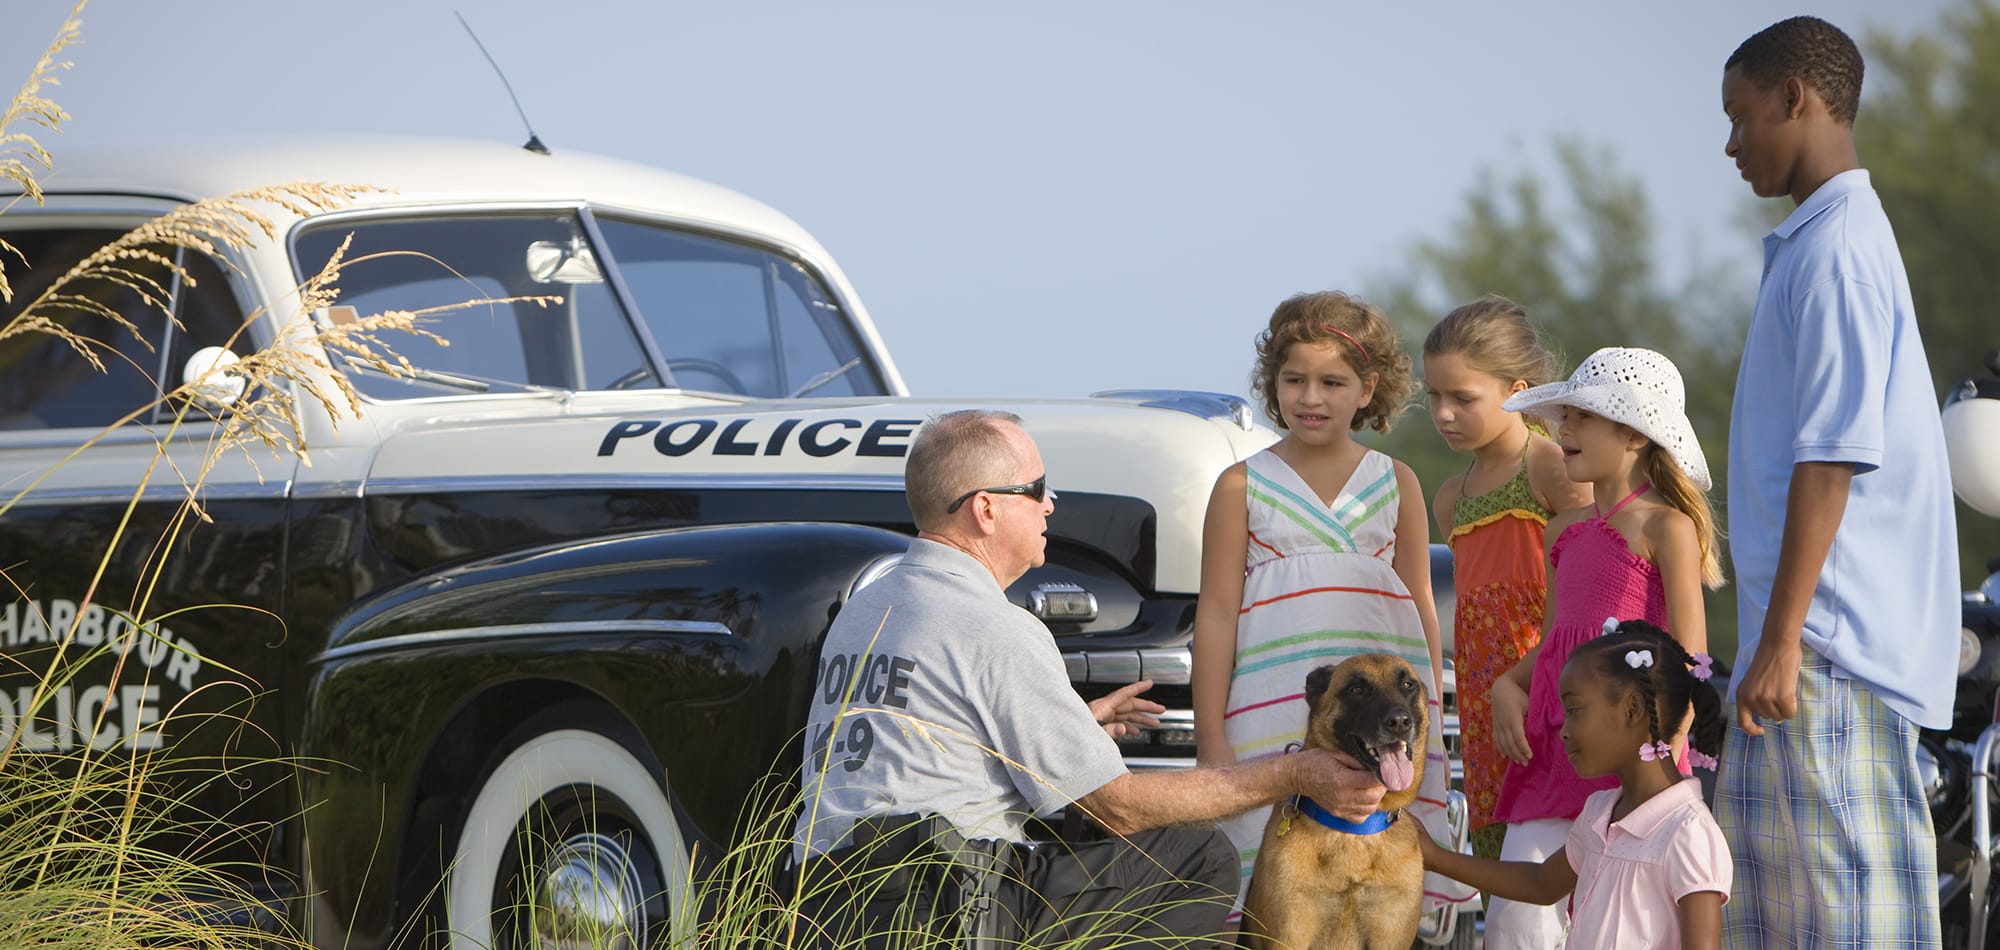 A police officer talks to children